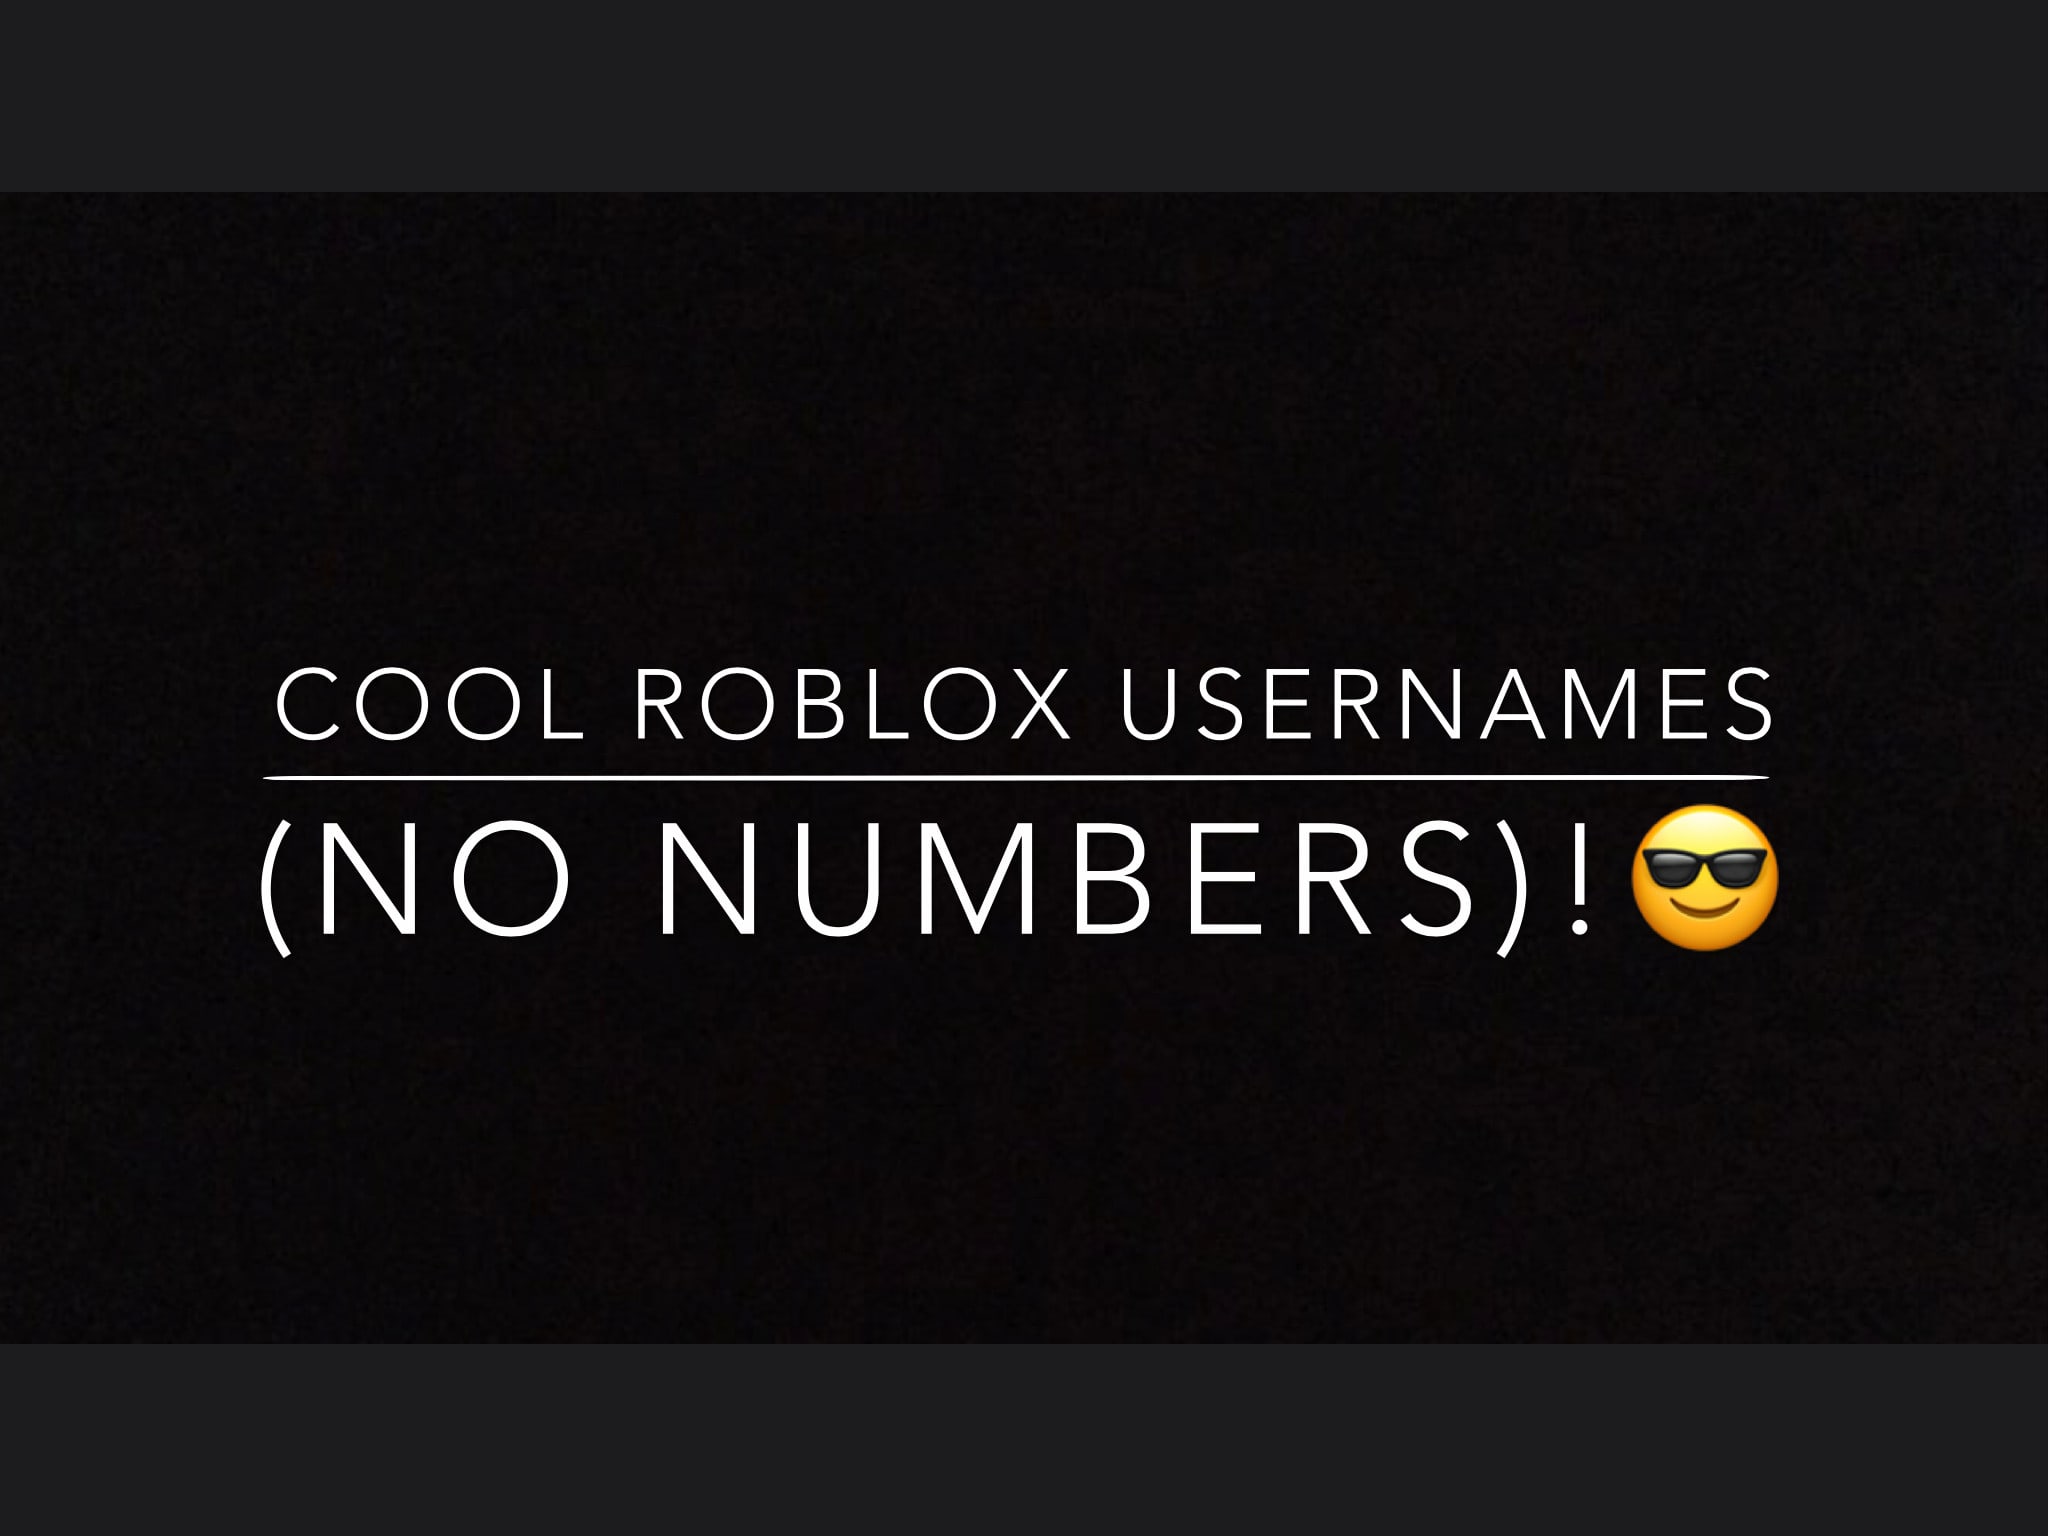 Offer You Cool Roblox Usernames By Ciunkyz - cool robux